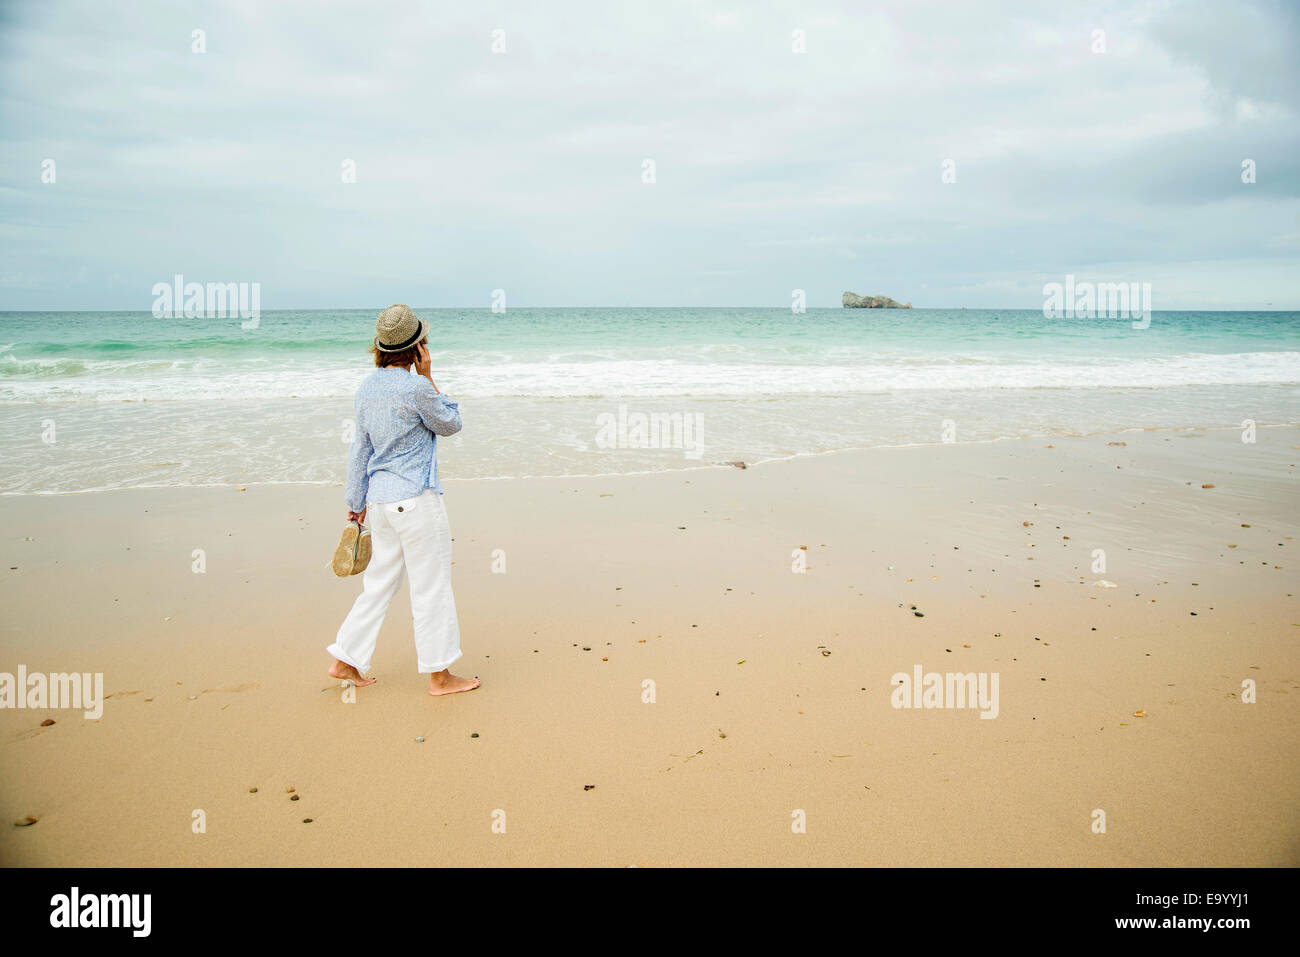 Young woman strolling on beach chatting on smartphone, Camaret-sur-mer, Bretagne, France Banque D'Images